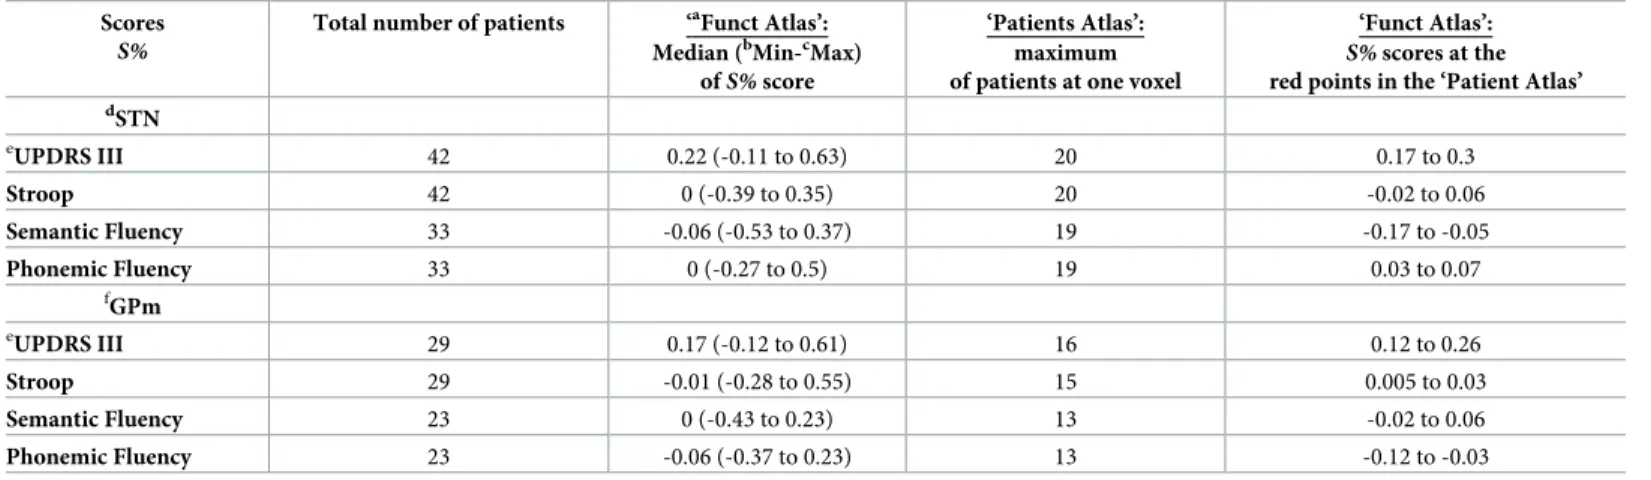 Table 3. Details of S% scores and number of patients for ‘Functional’ and ‘Patient’ atlases.